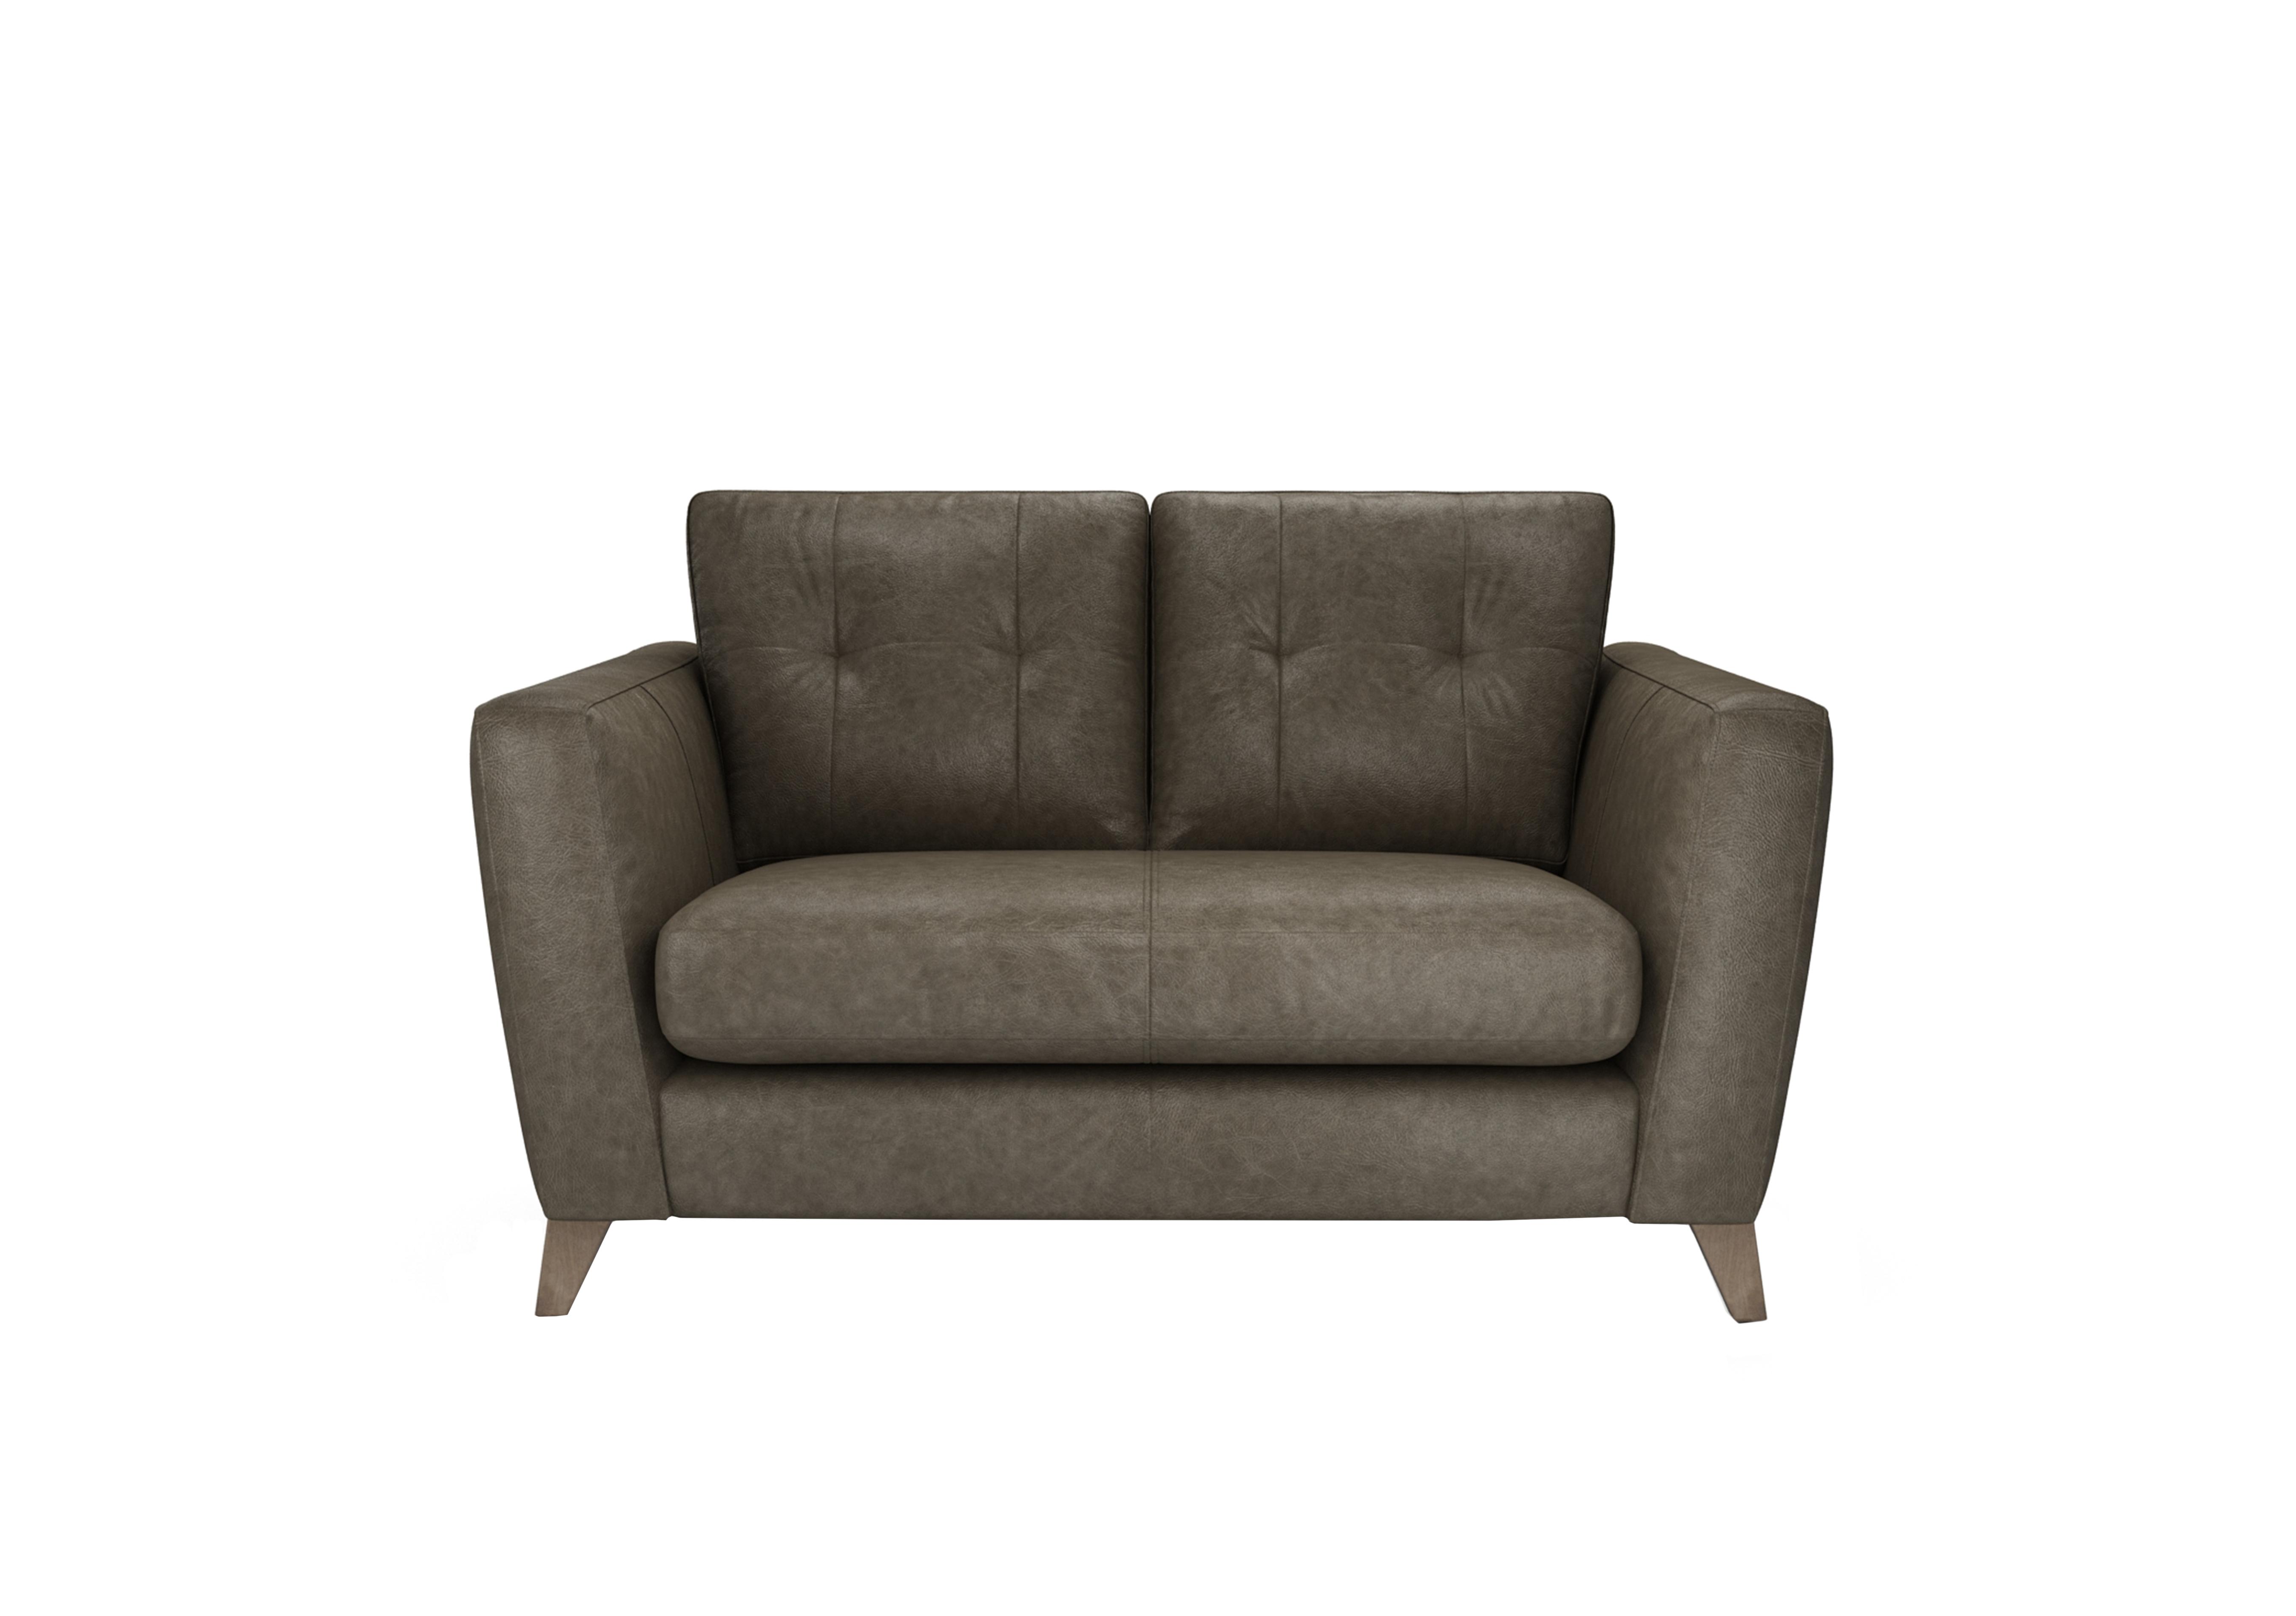 Hermione 2 Seater Leather Sofa in Gra189 Granite Wo Ft on Furniture Village